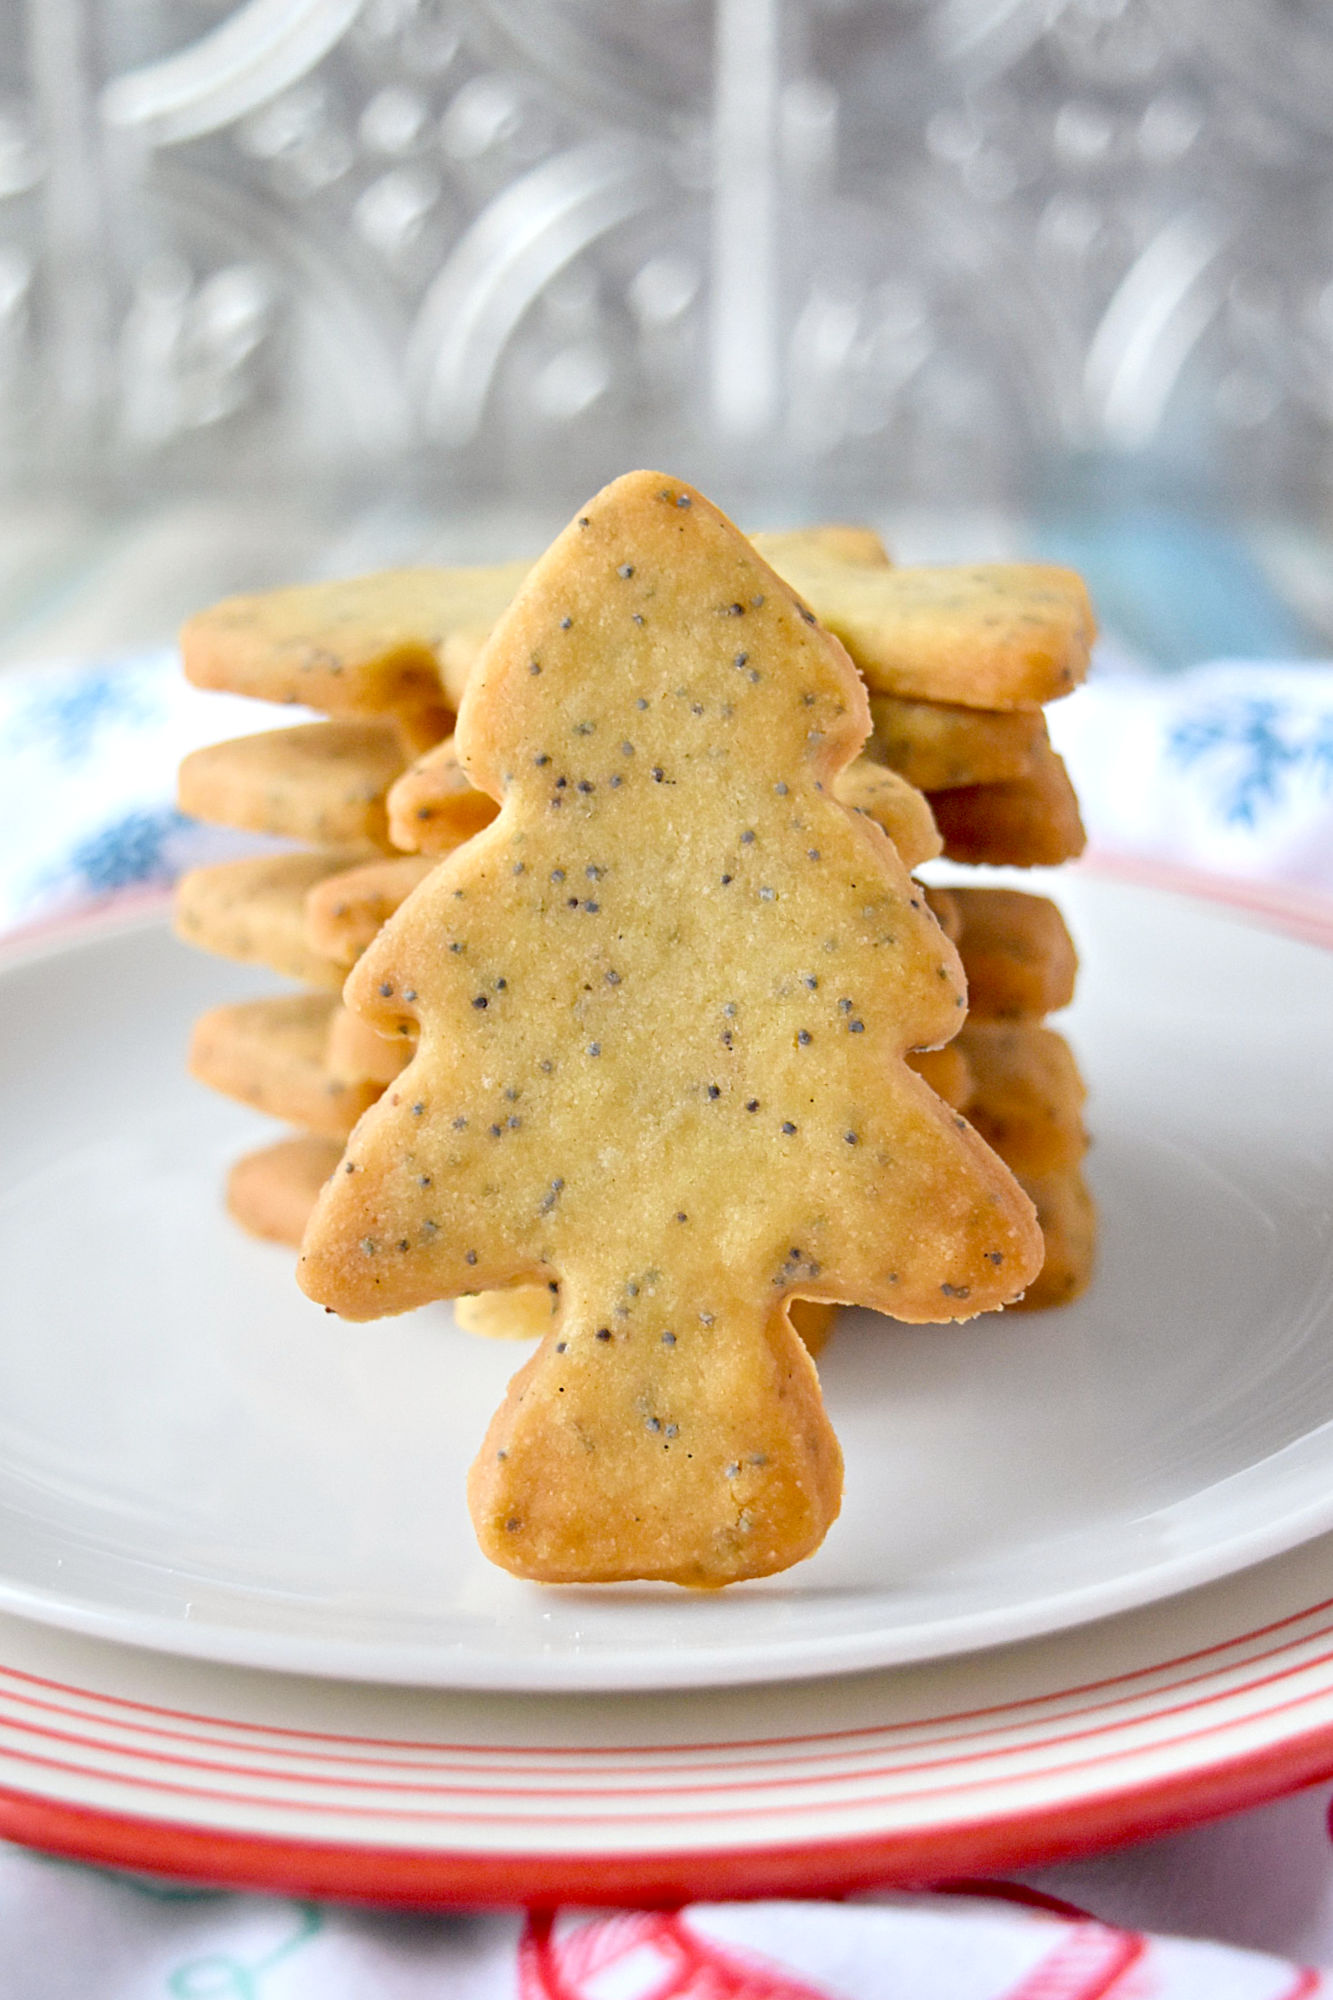 Poppy Seed Shortbread is tender and flaky shortbread speckled with poppy seeds. They’re buttery, rich, and simply delicious. #ChristmasCoookies